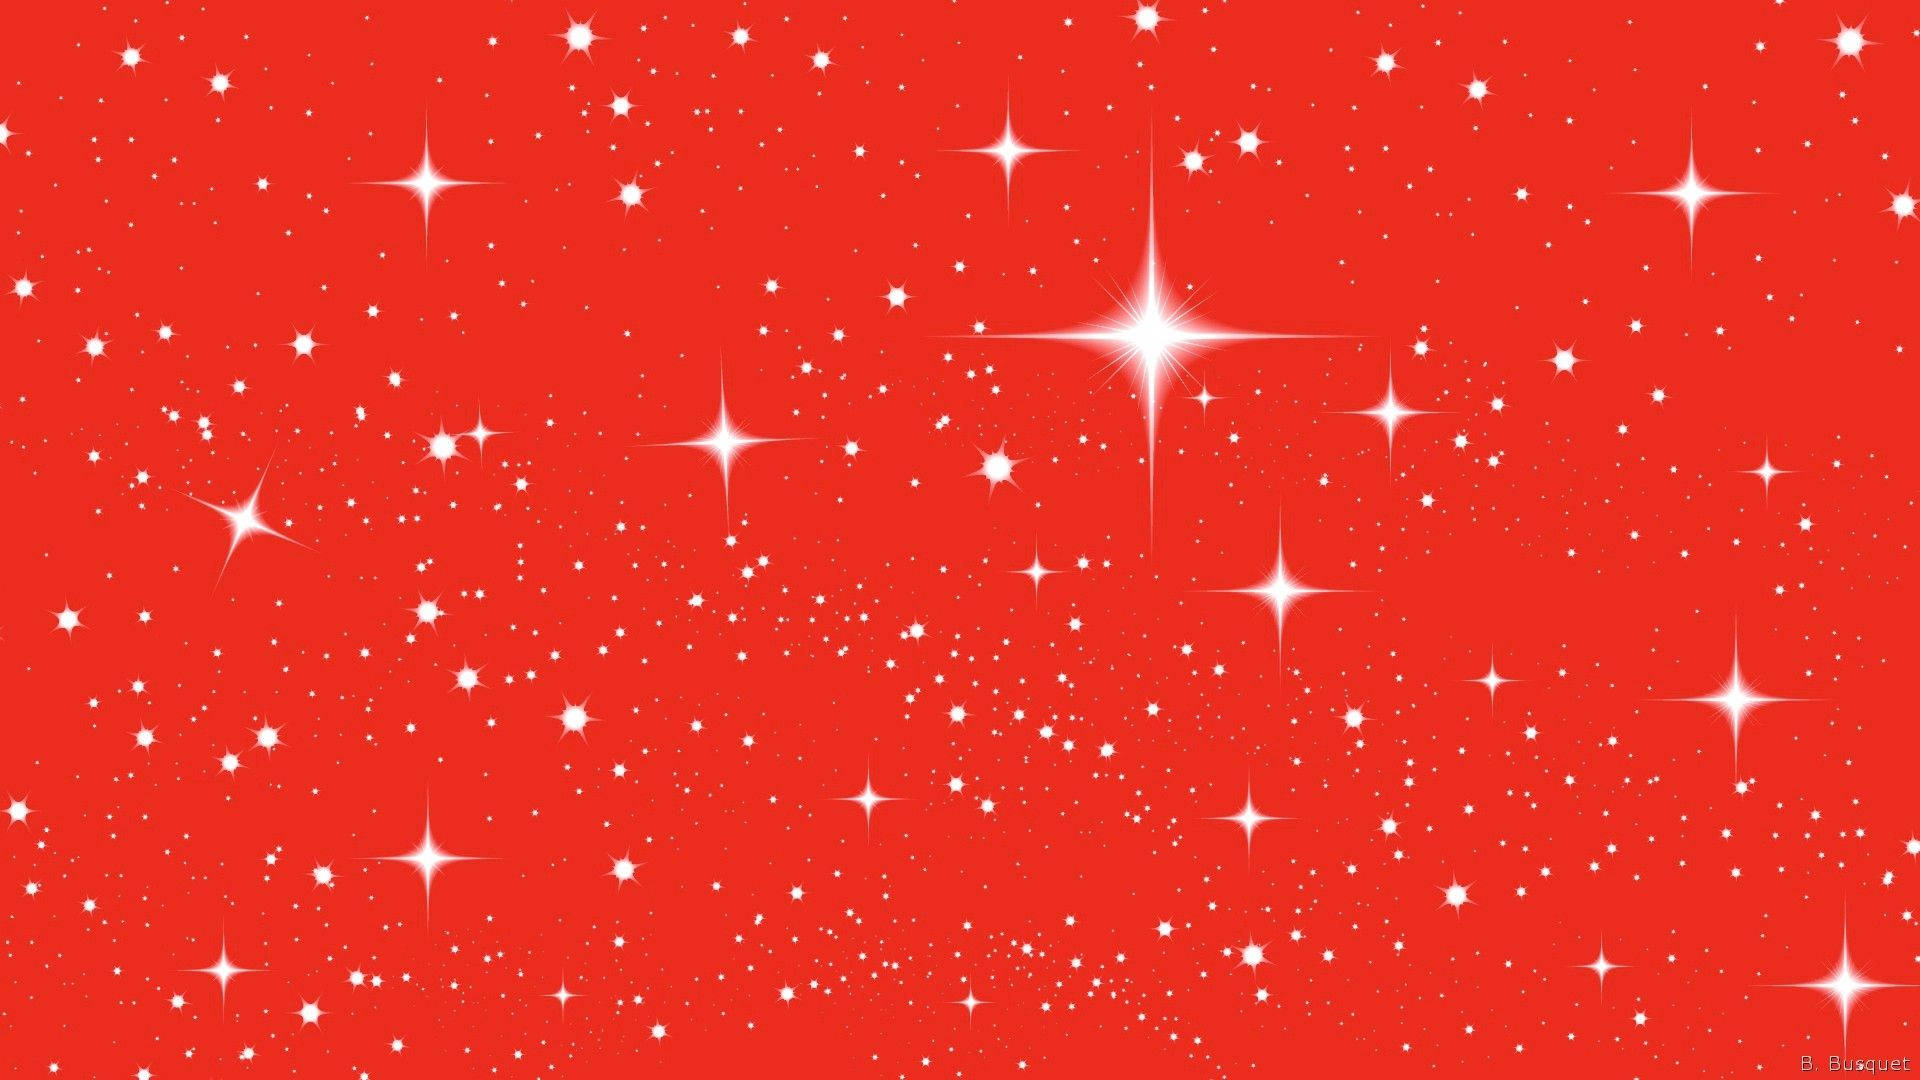 Dazzling Stars on a Red Background Wallpaper